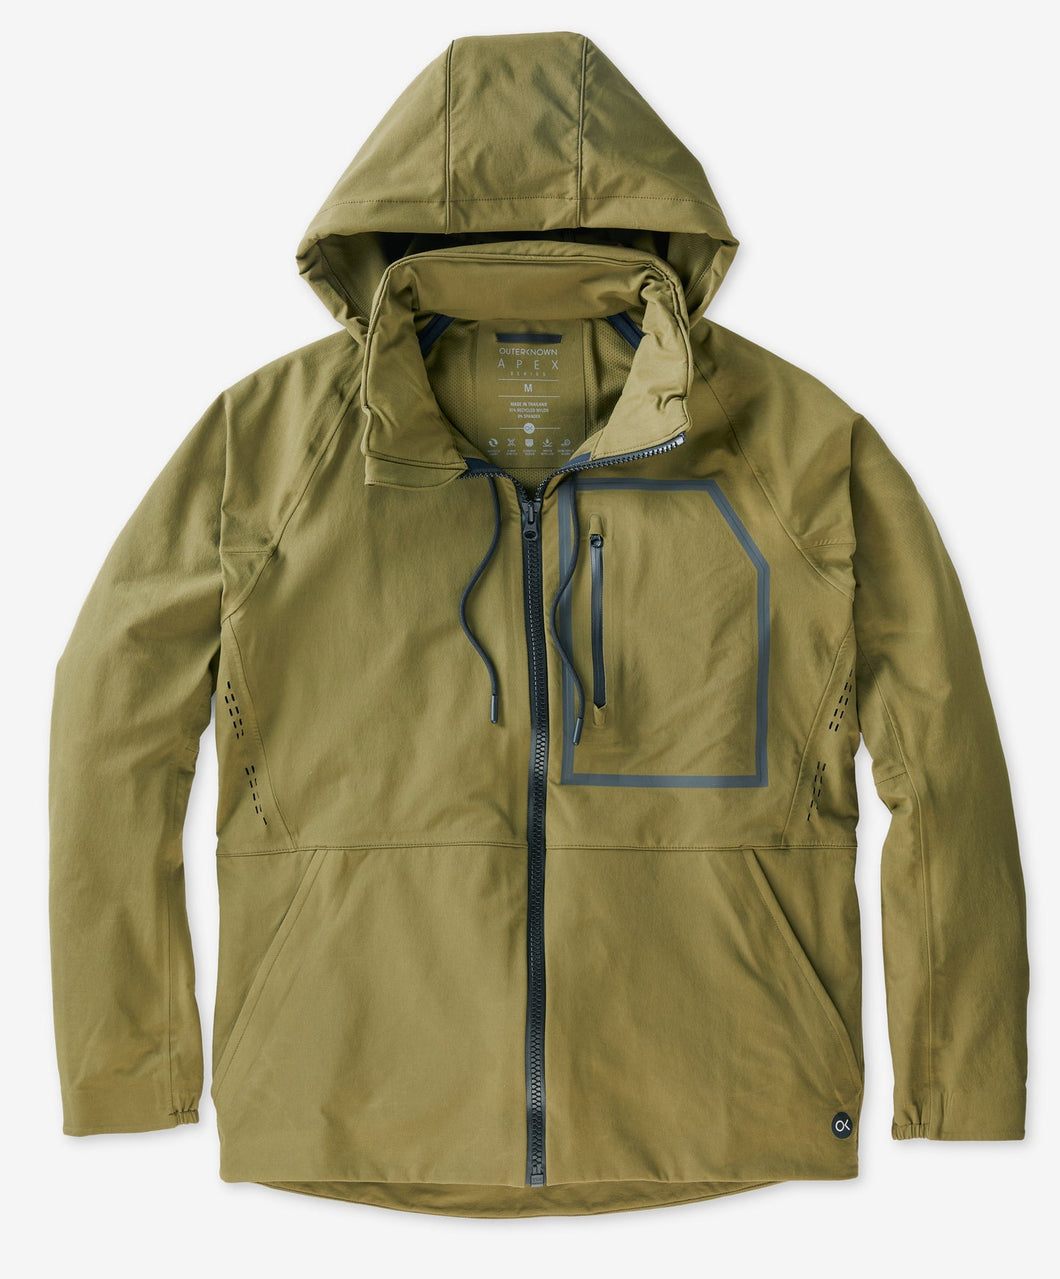 Apex Jacket by Kelly Slater (Olive Branch) - Outerknown